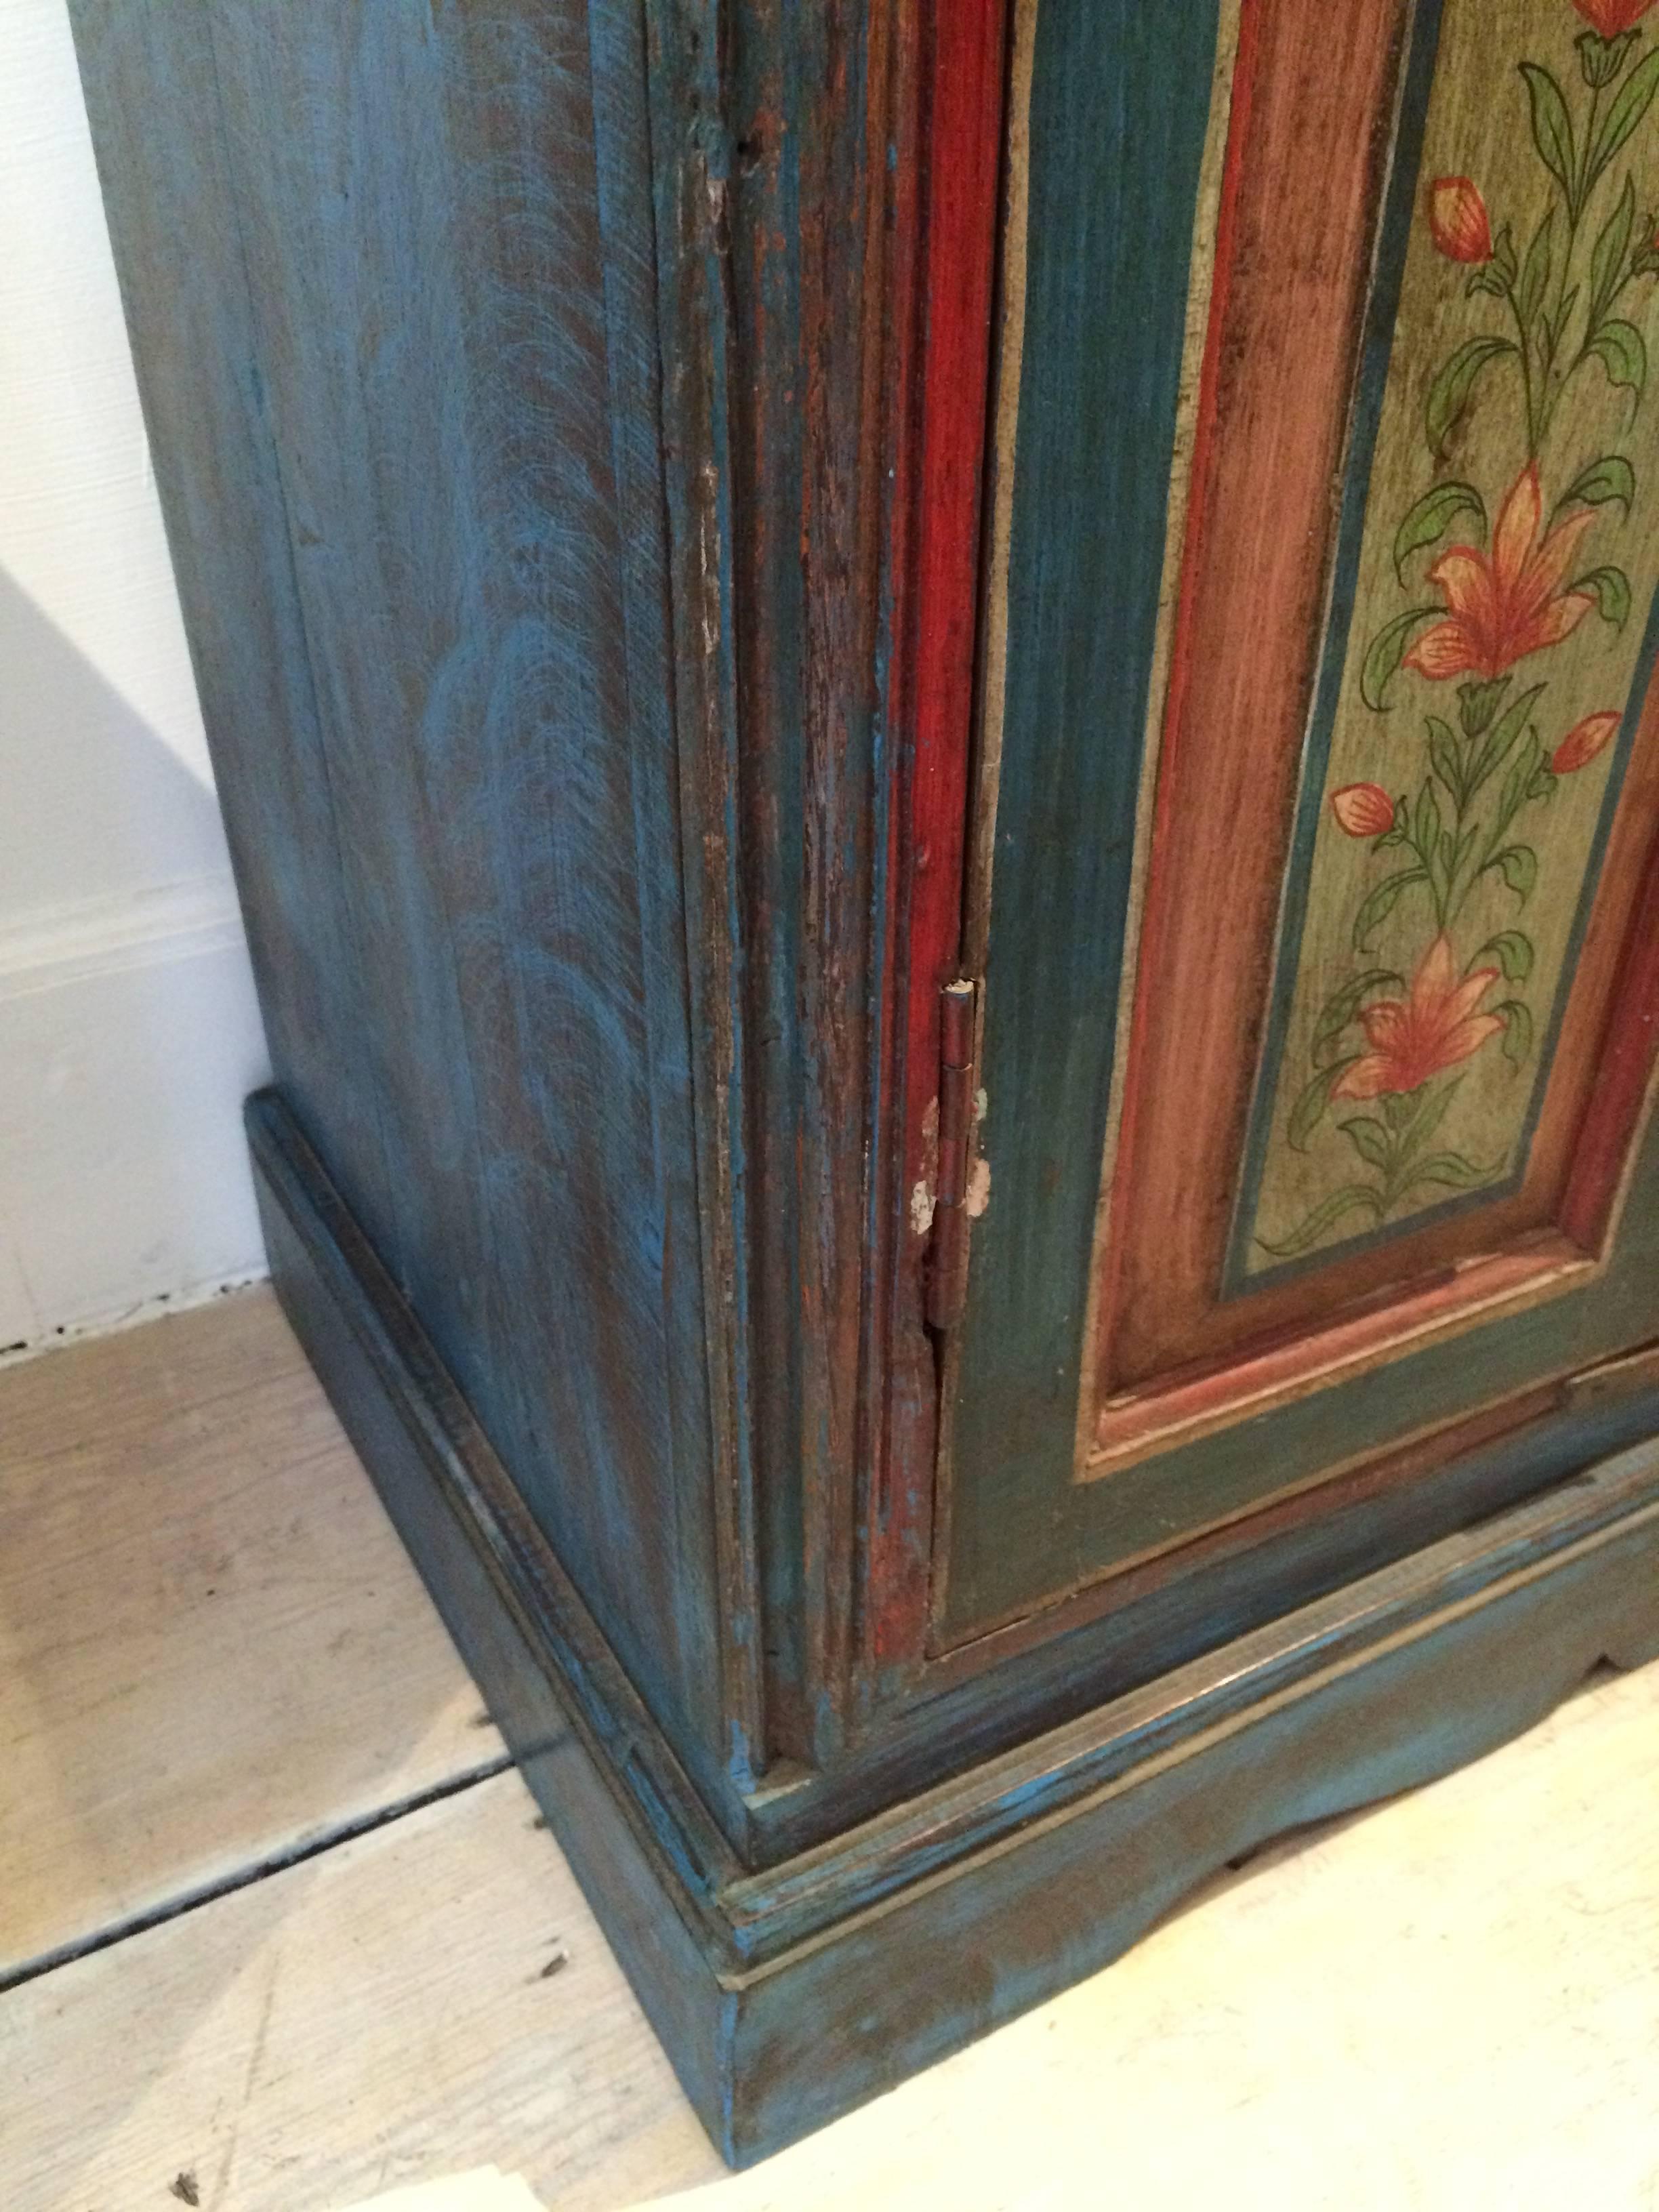 Lovely Early 1900s Hand-Painted Window Shutters Converted to Cabinet 2